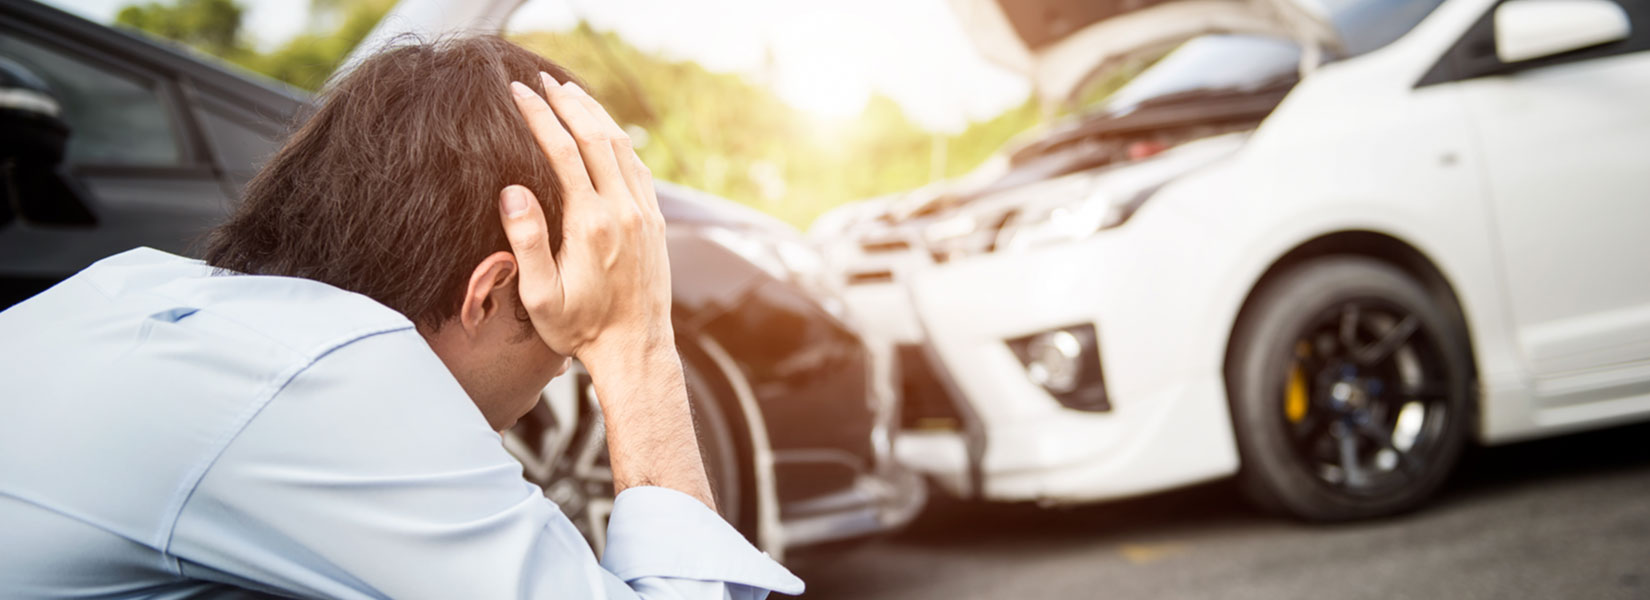 7 Reasons to Hire a Lawyer For an Accident Claim - Programming Insider